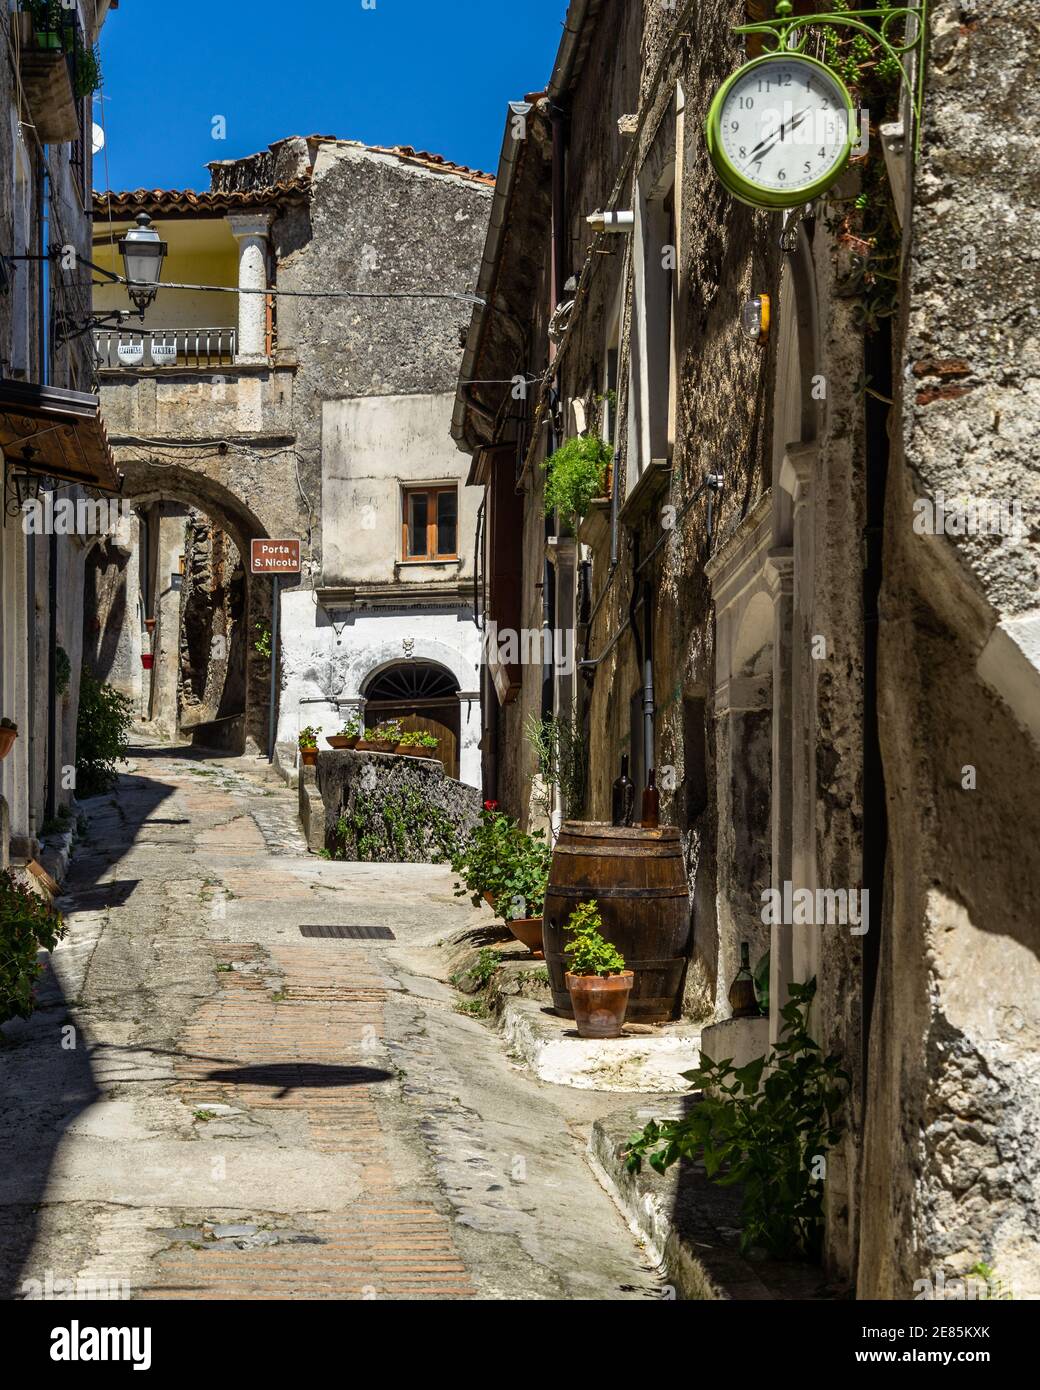 Typical narrow street in Morano Calabro, one of the best-preserved medieval villages of Calabria region, Italy Stock Photo